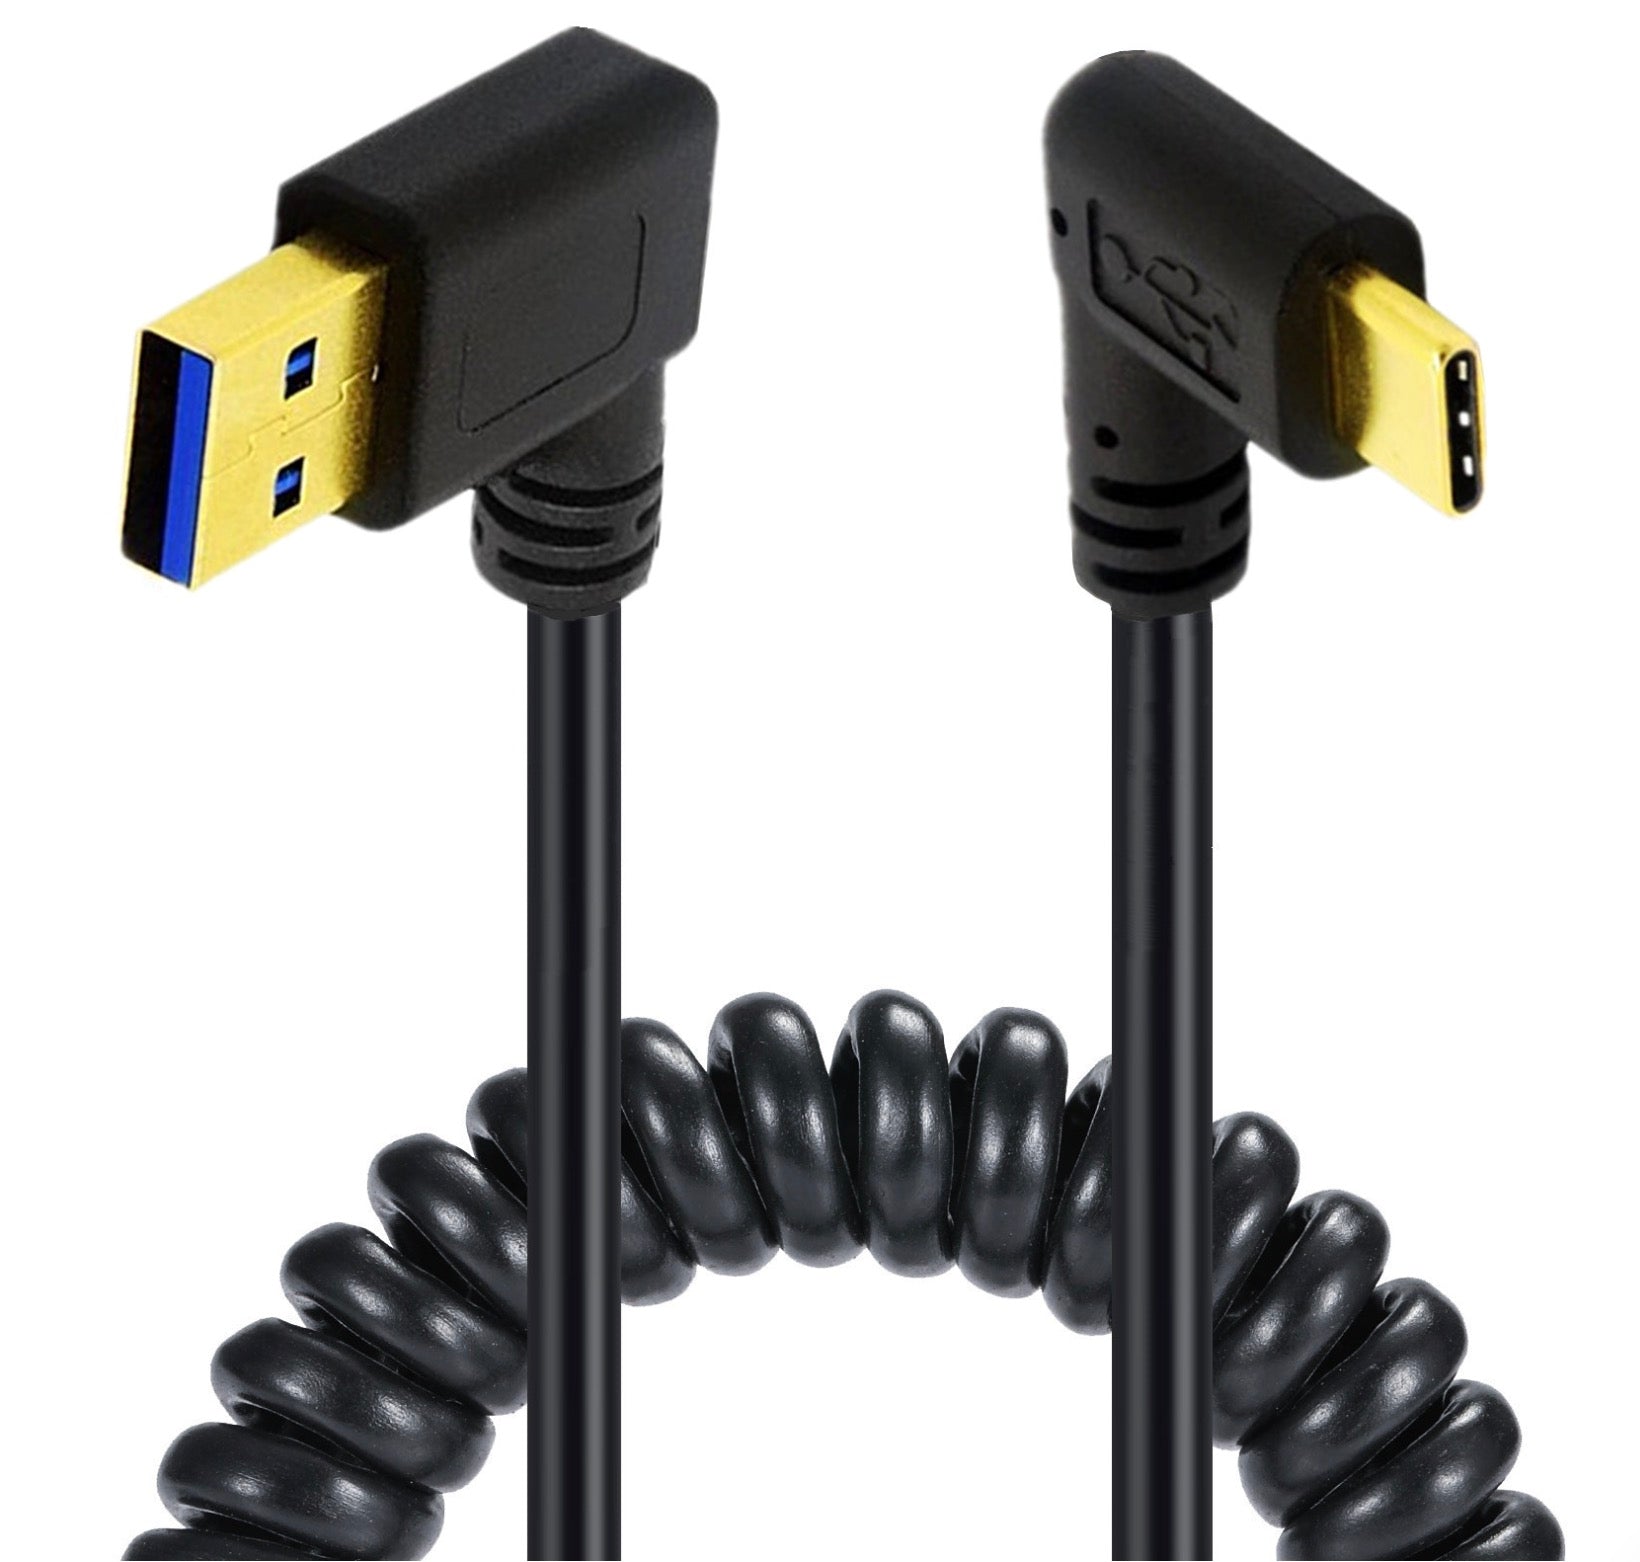 USB C Type-C Male to USB 3.0 A Male Spiral Cable - Right Angle